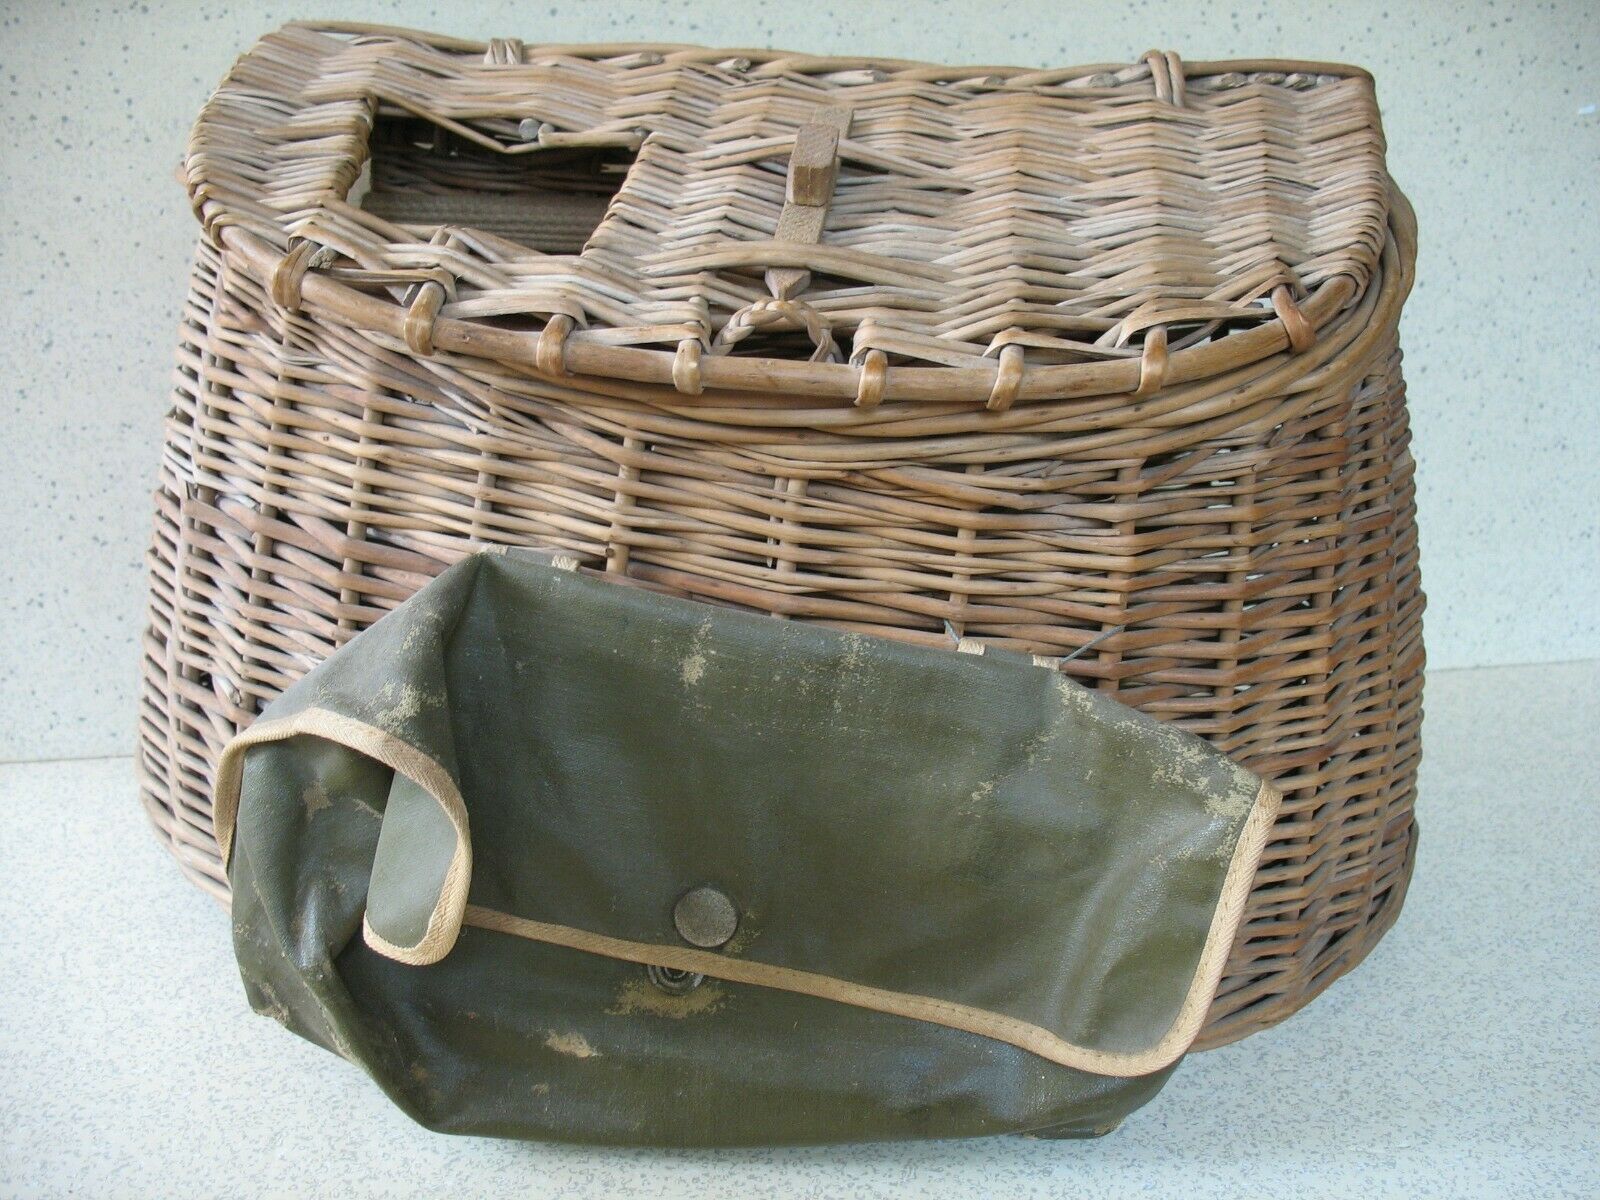 Vintage Woven Fishing Creel With Pouch. 16x6x10 Inches. Excellent Condition